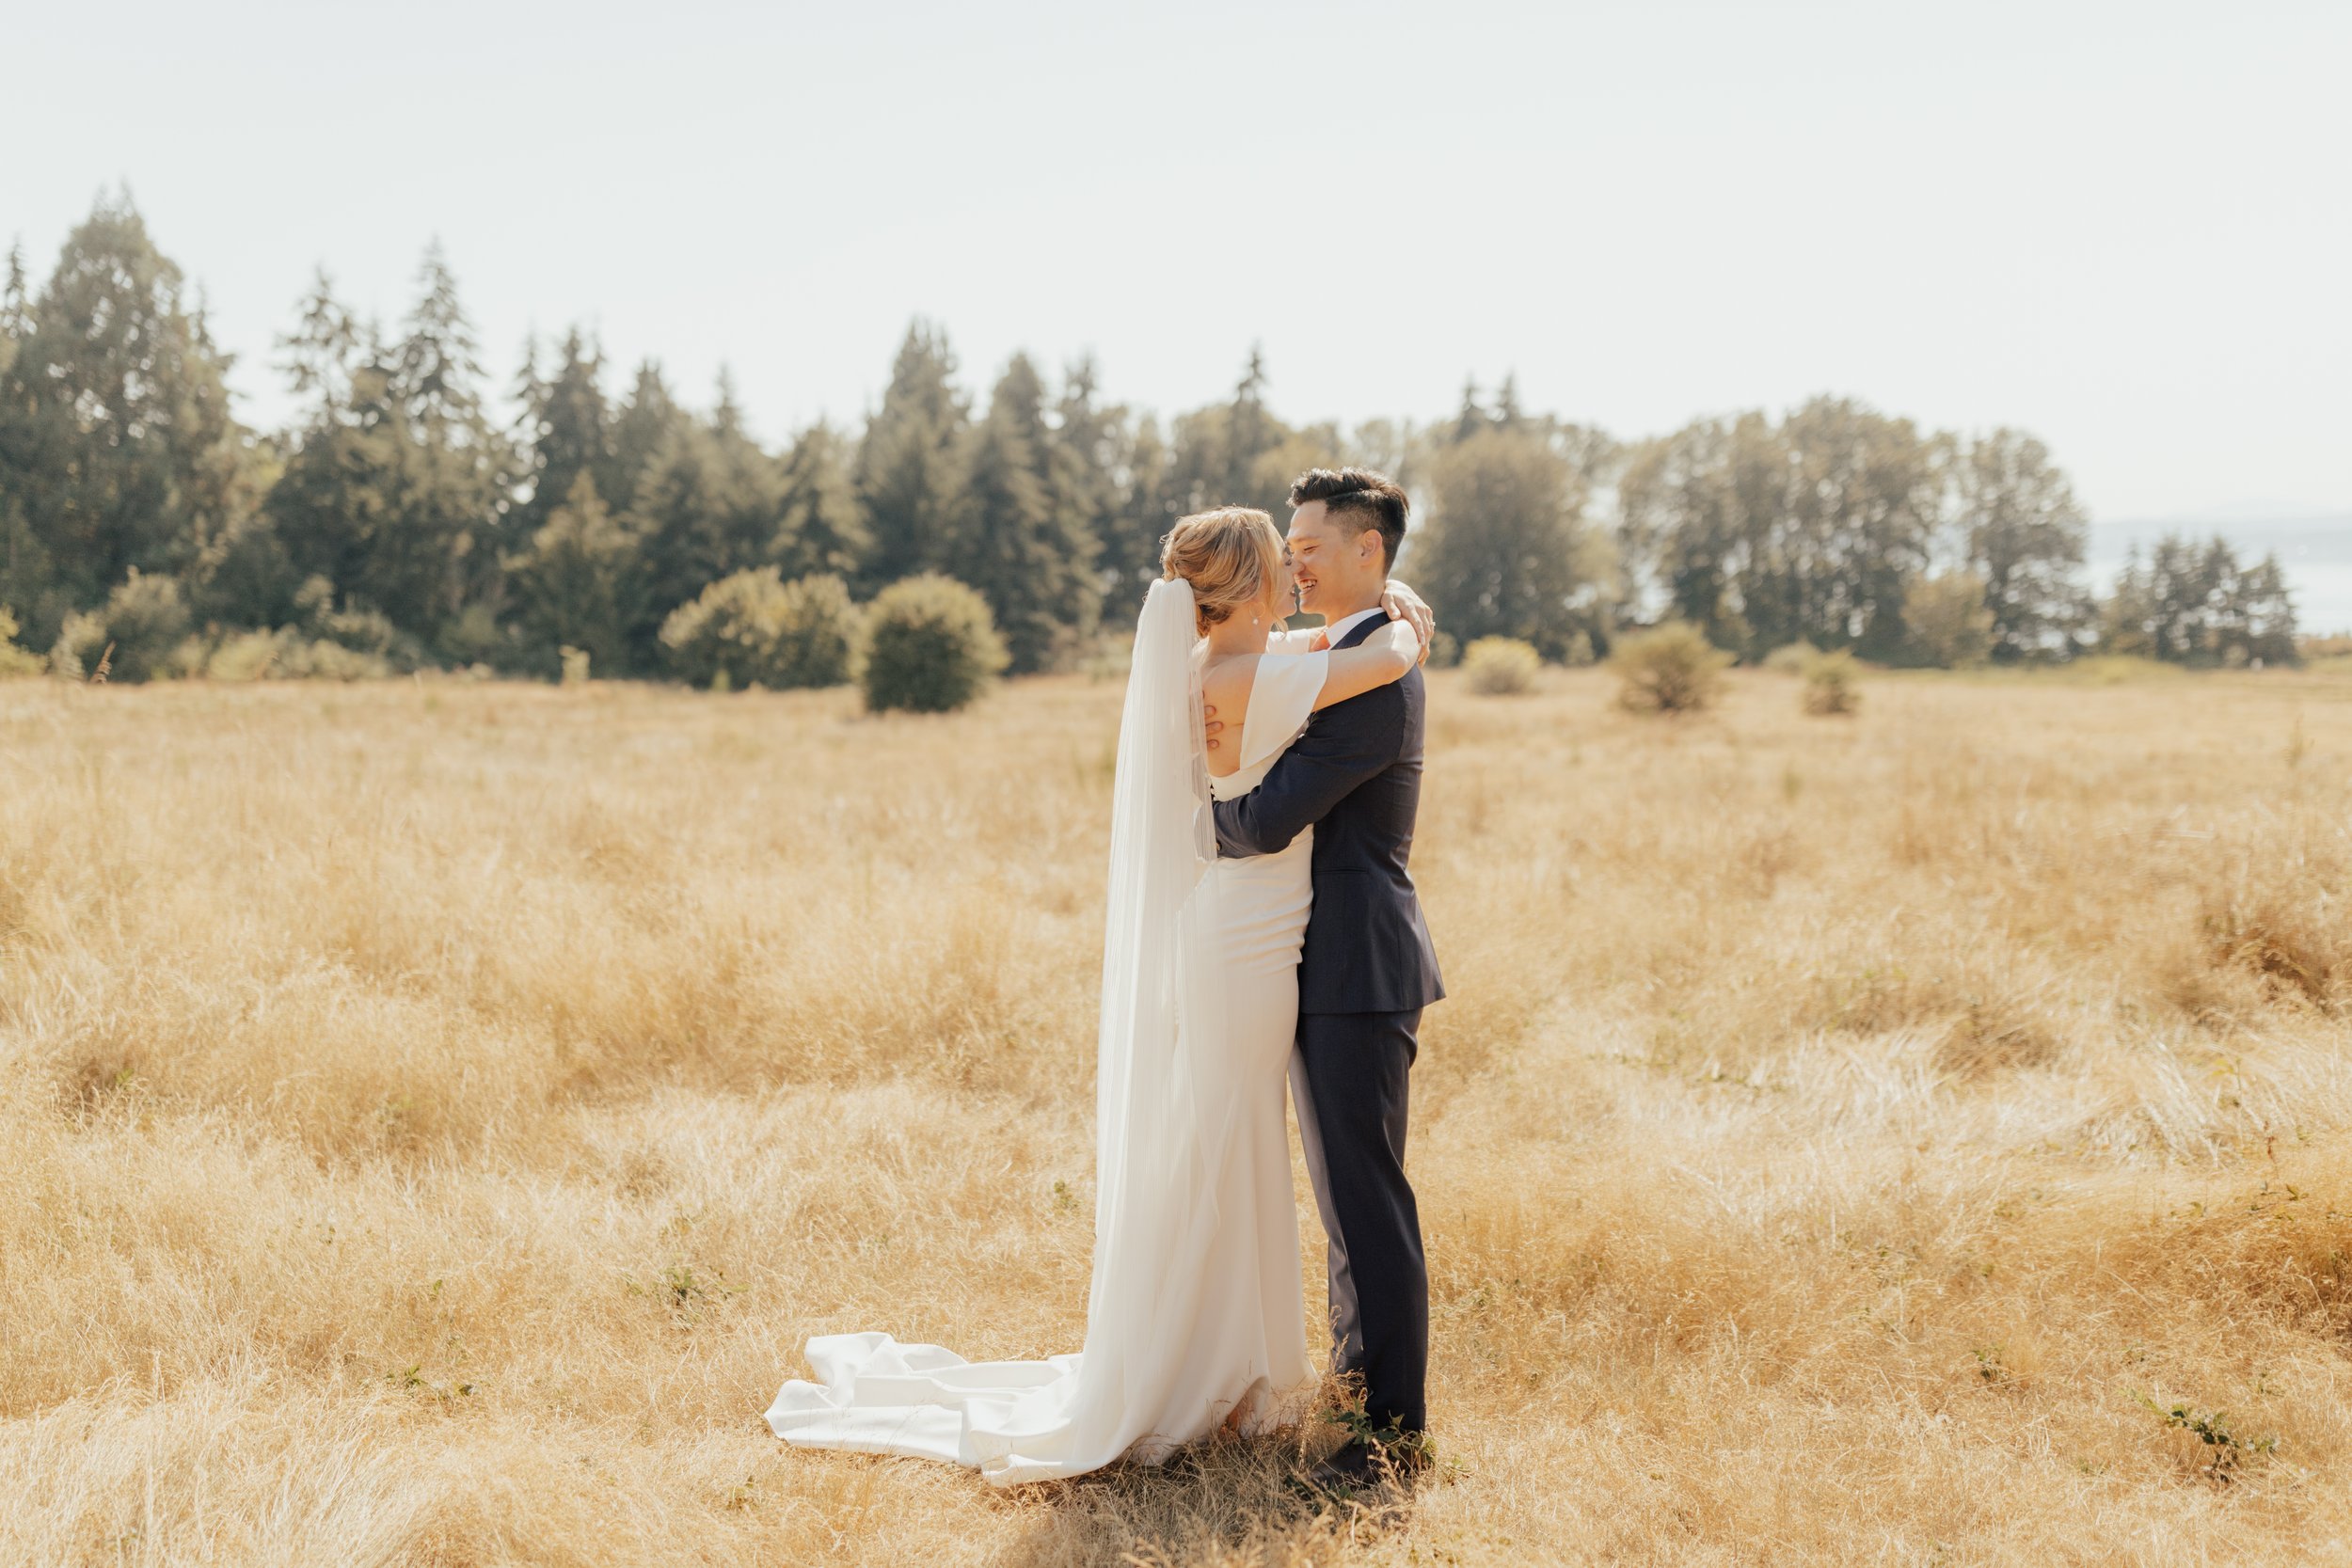 pacific-engagements-discovery-park-wedding-portraits-bride-and-groom-rachel-syrisko-photography